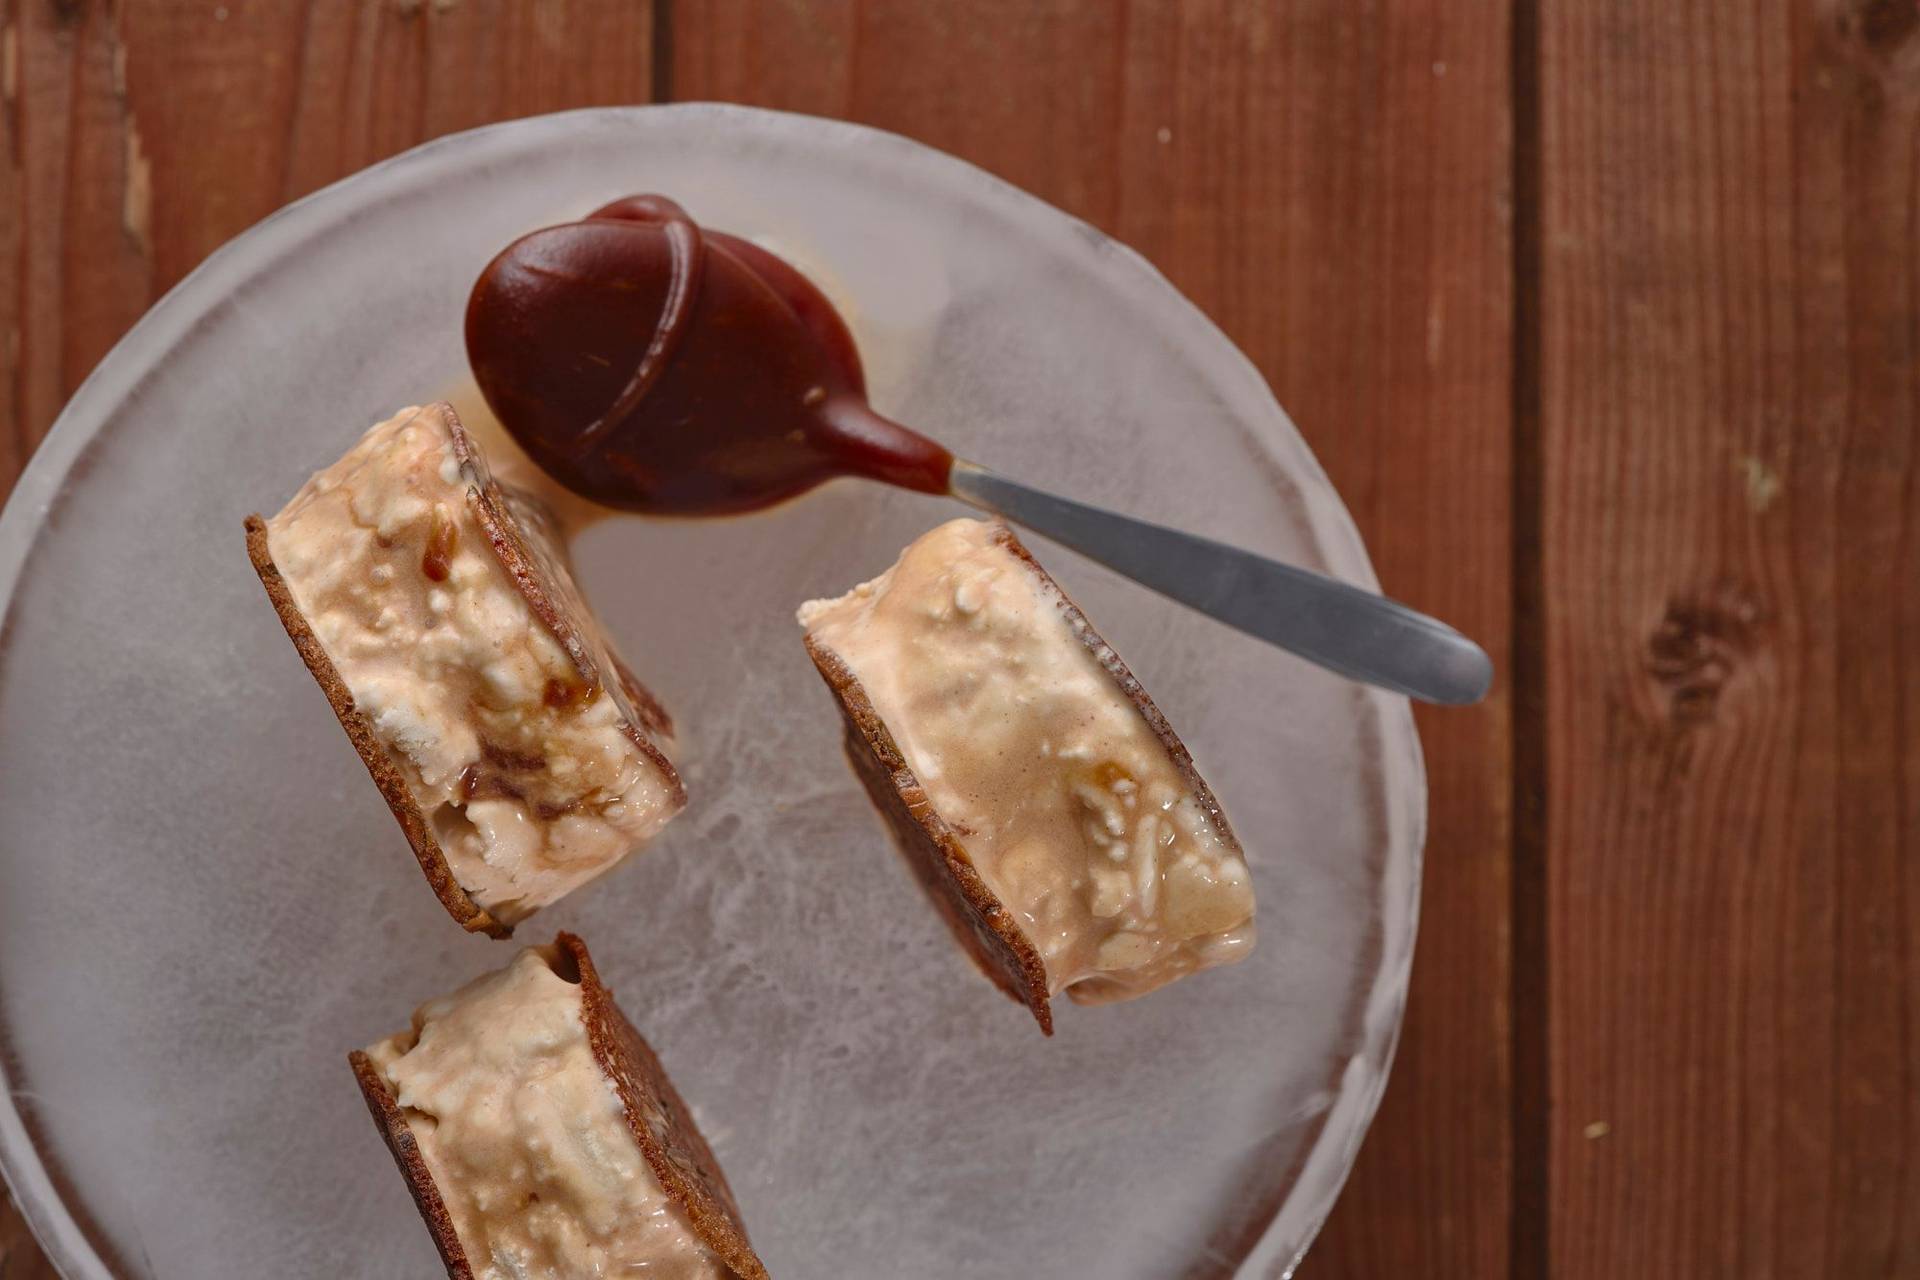 sourdough ice cream sandwich with salted caramel on an ice plate with wooden table